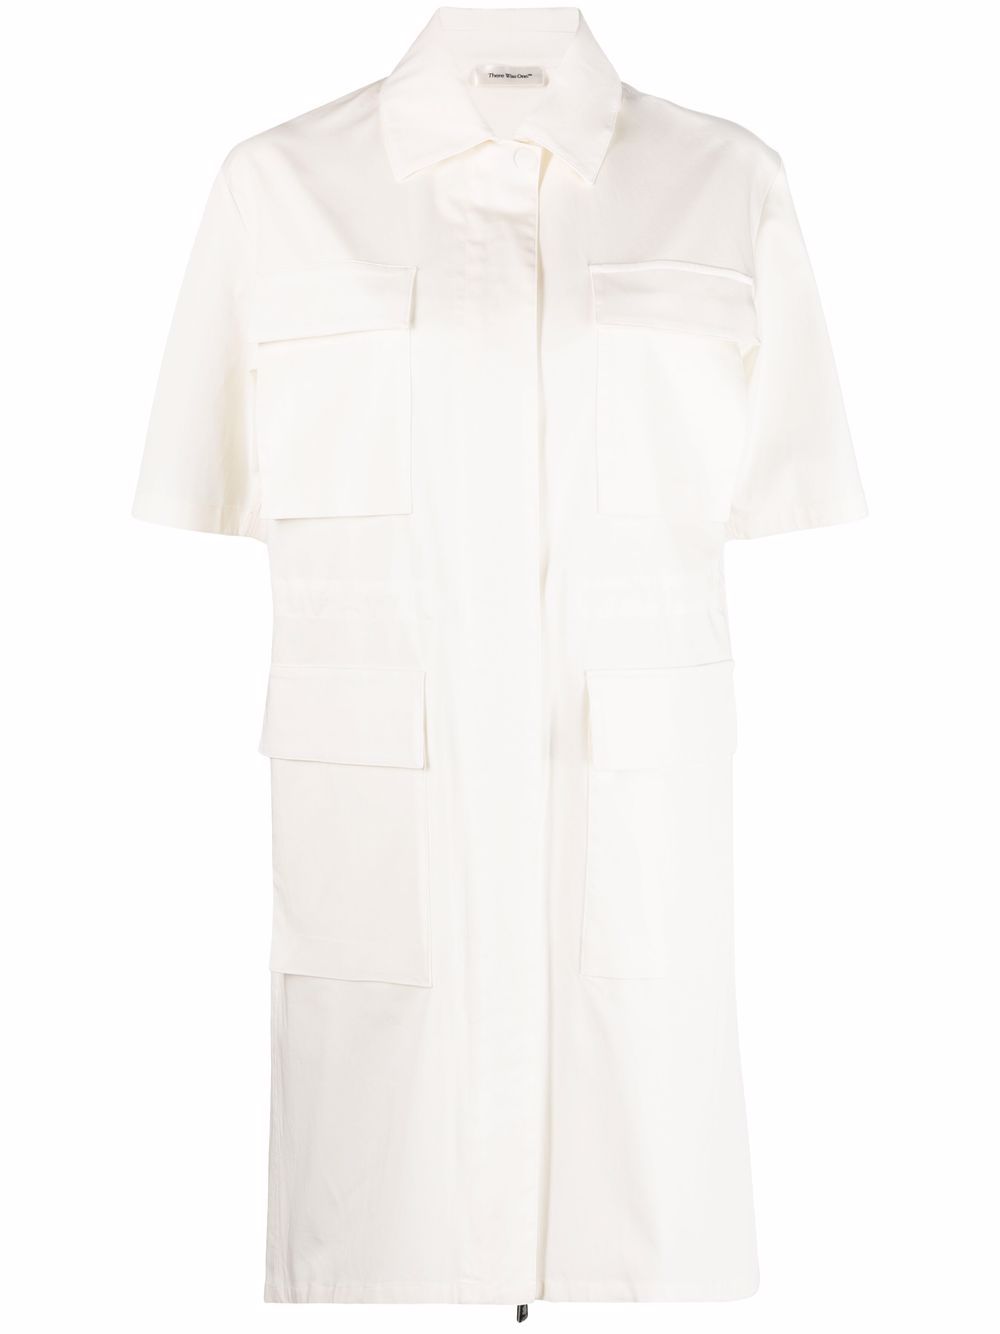 Image 1 of There Was One short-sleeve shirtdress